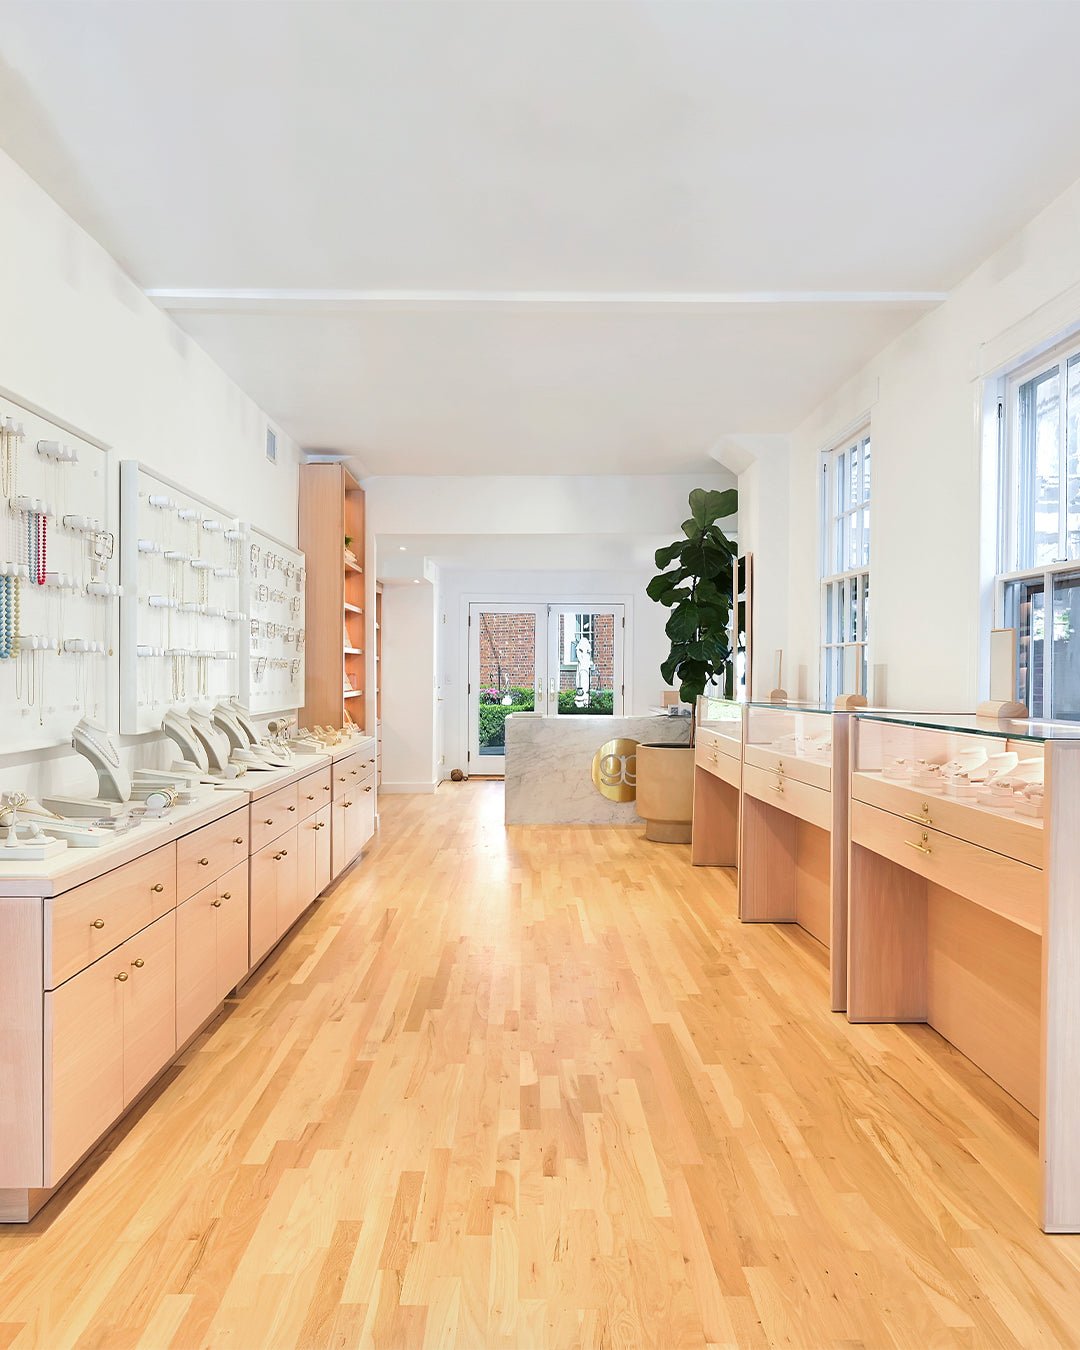 Bright, white store interior with wood floors